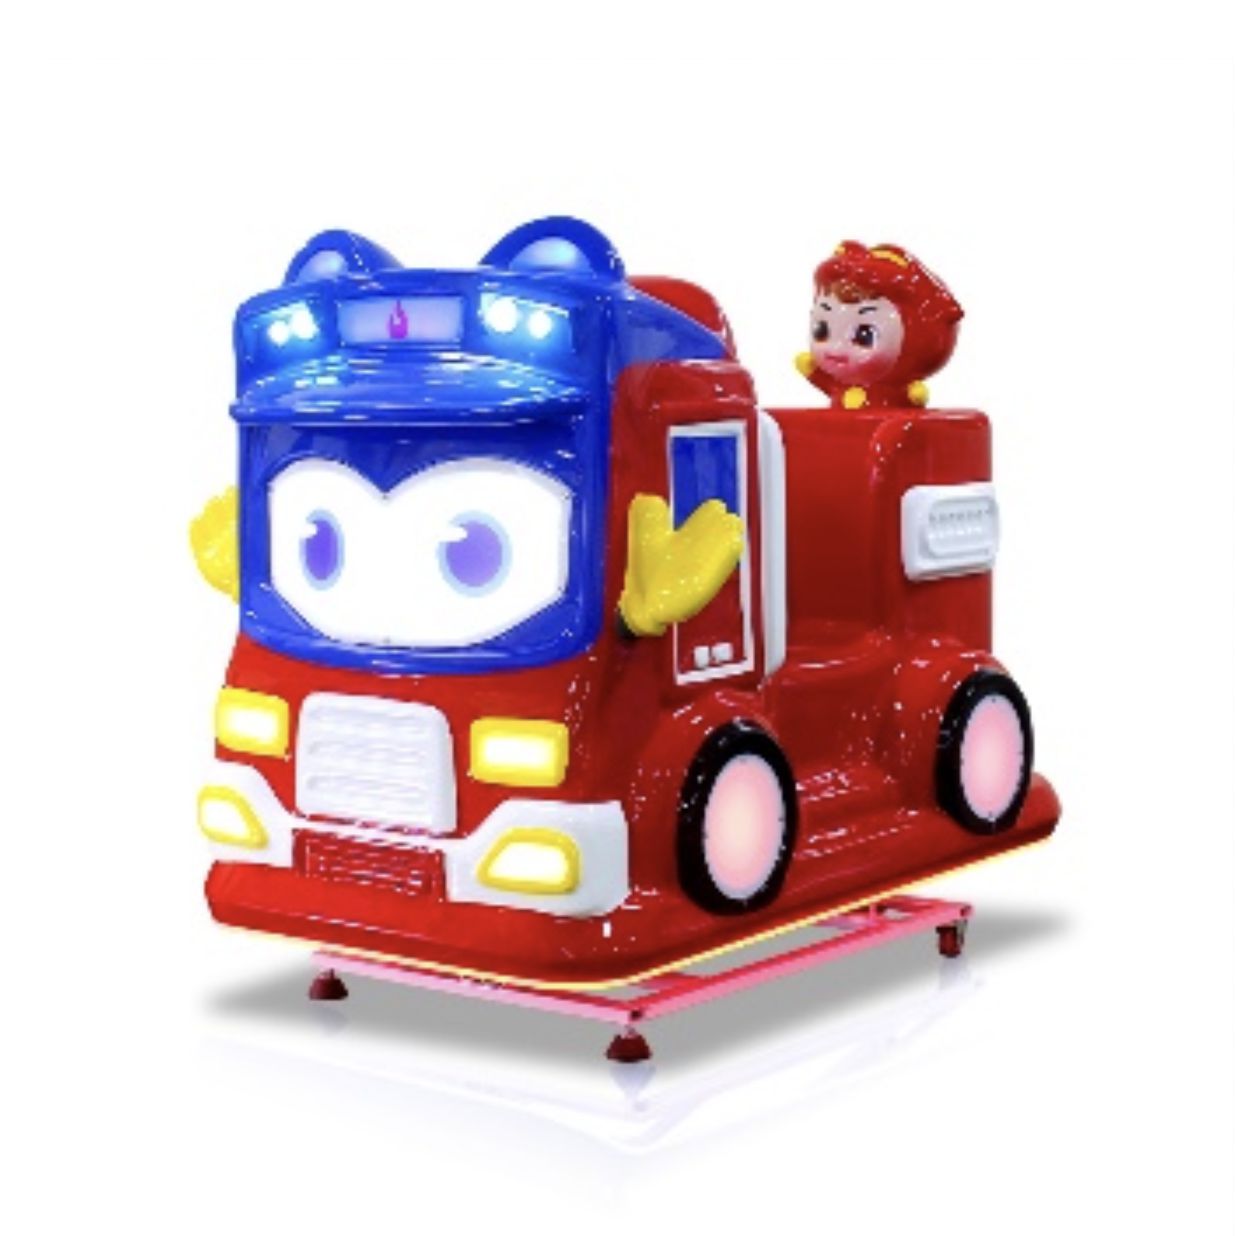 Most Popular Coin operated Car Rides For Sale Made In China